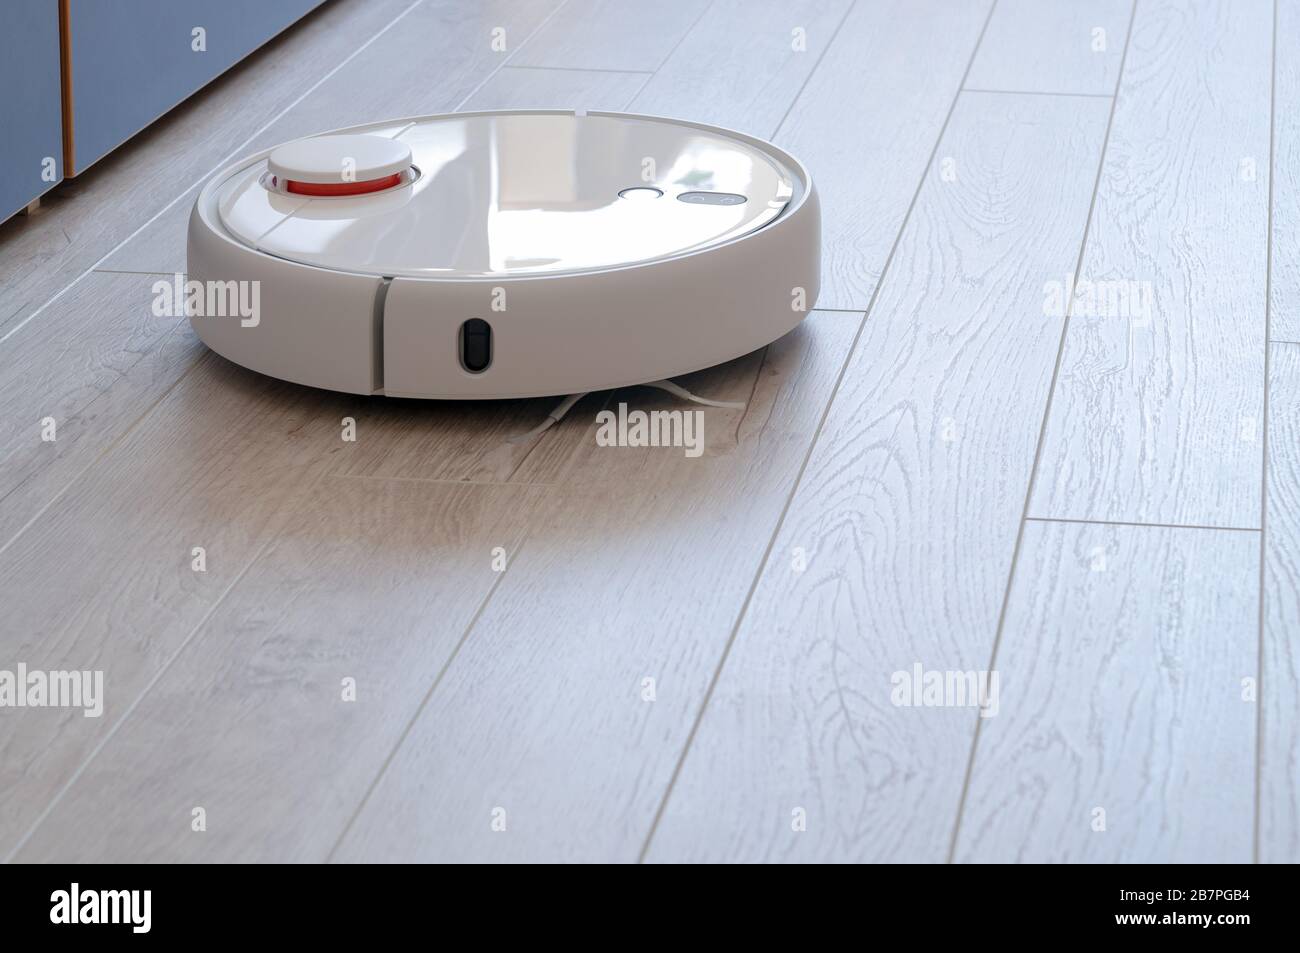 robotic vacuum cleaner on laminate wood floor smart cleaning technology Stock Photo